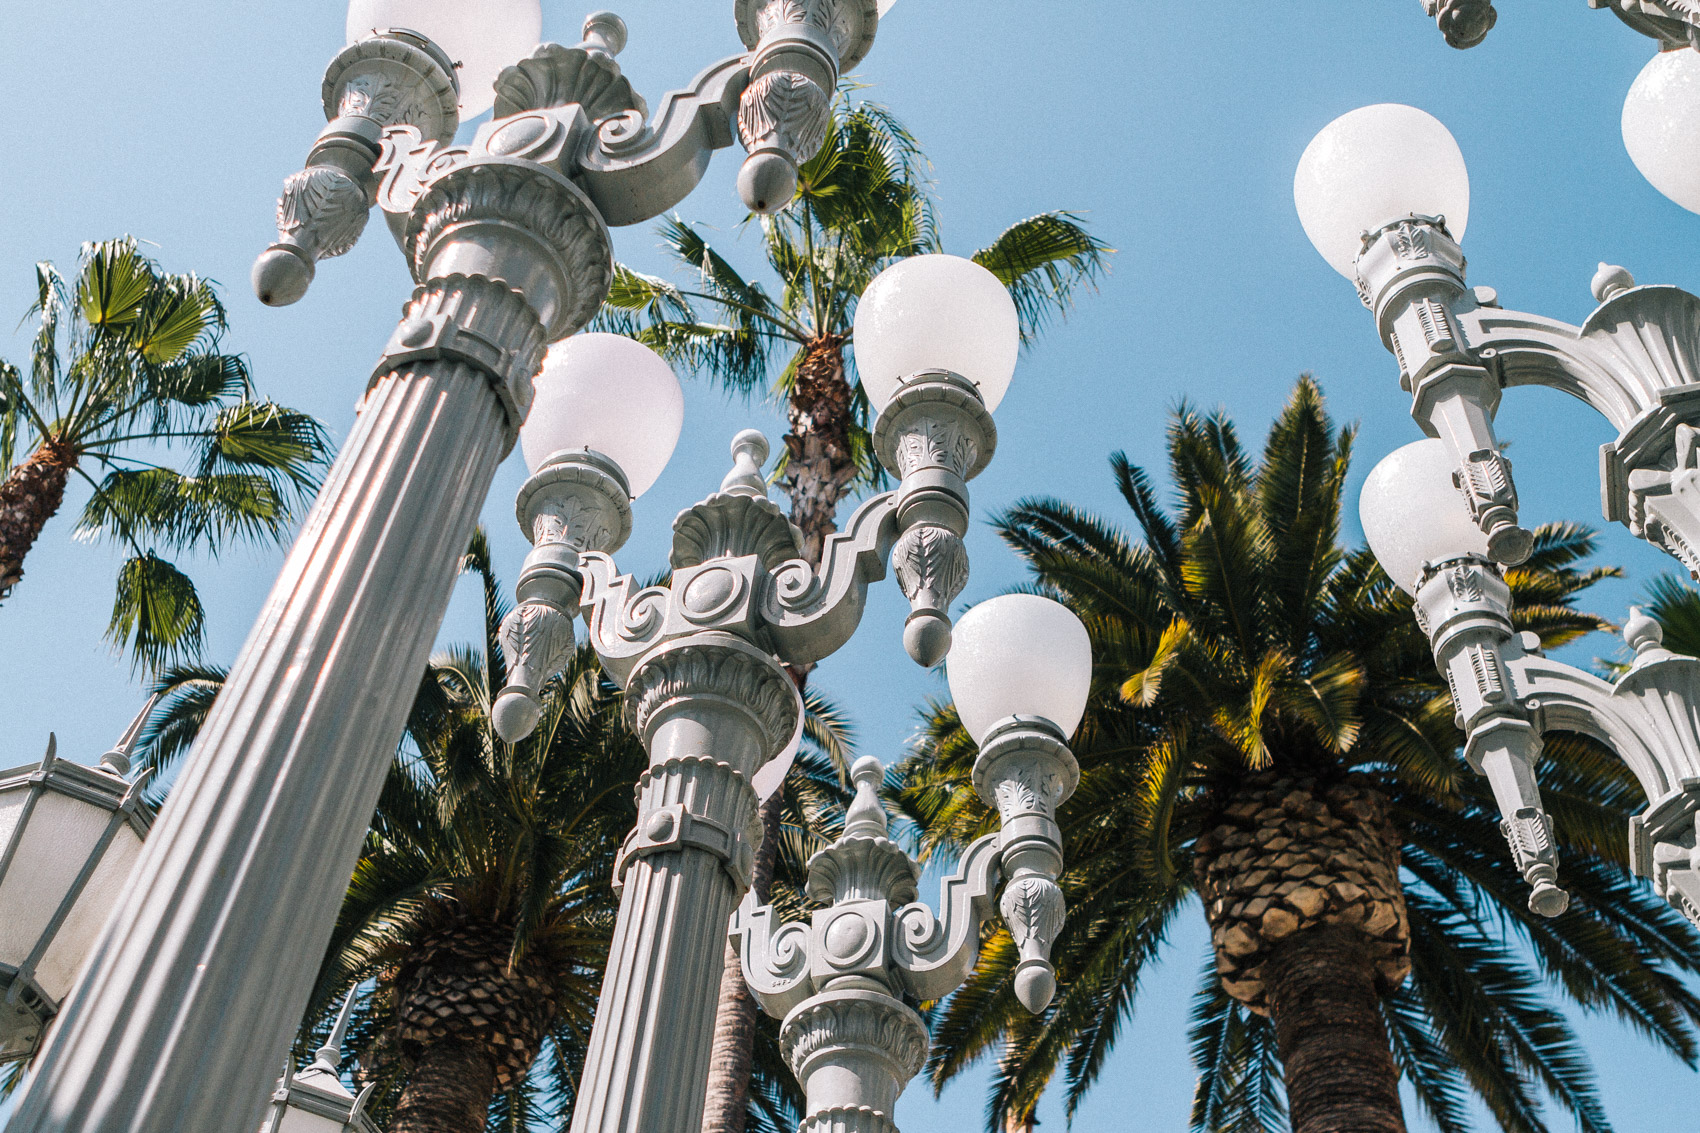 Urban Light lamp post installation by Chris Burden at the LACMA